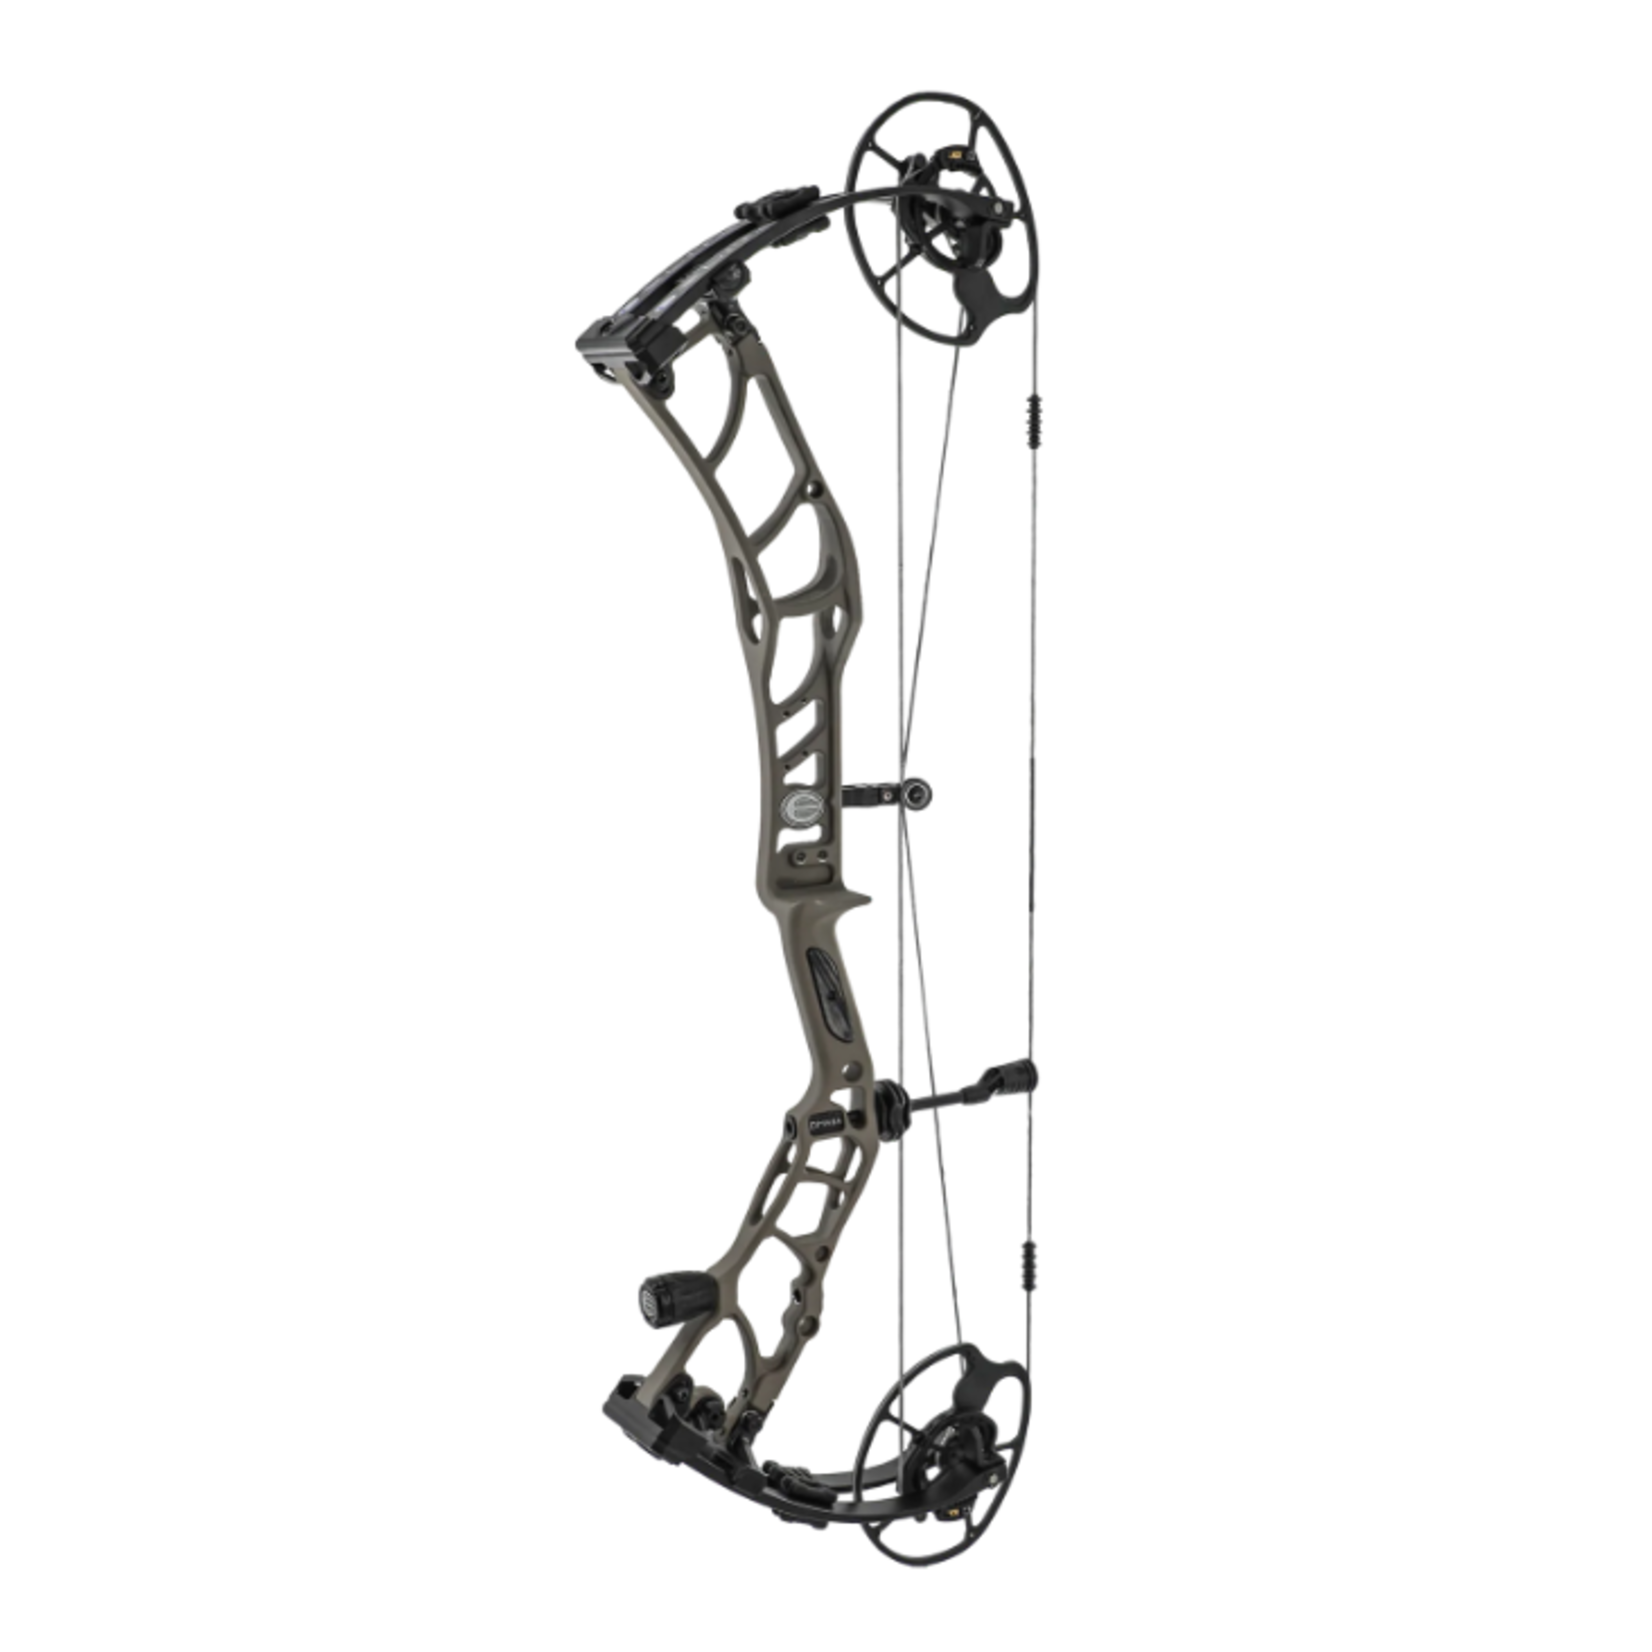 OMNIA COMPOUND HUNTING BOW Gellco Outdoors